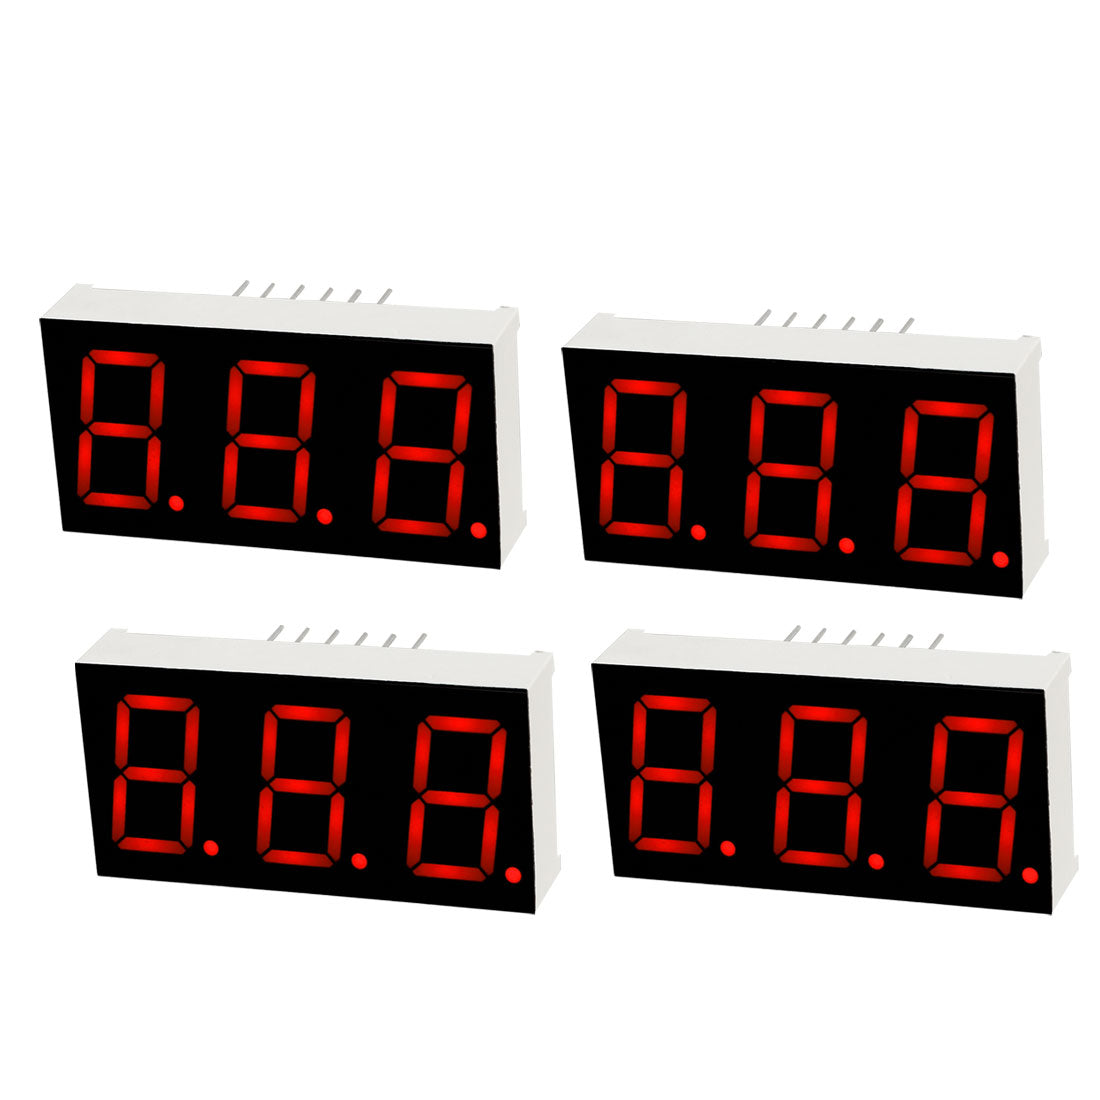 uxcell Uxcell Common Cathode 12 Pin 3 Bit 7 Segment 1.48 x 0.75 x 0.31 Inch 0.55" Red LED Display Digital Tube 4pcs